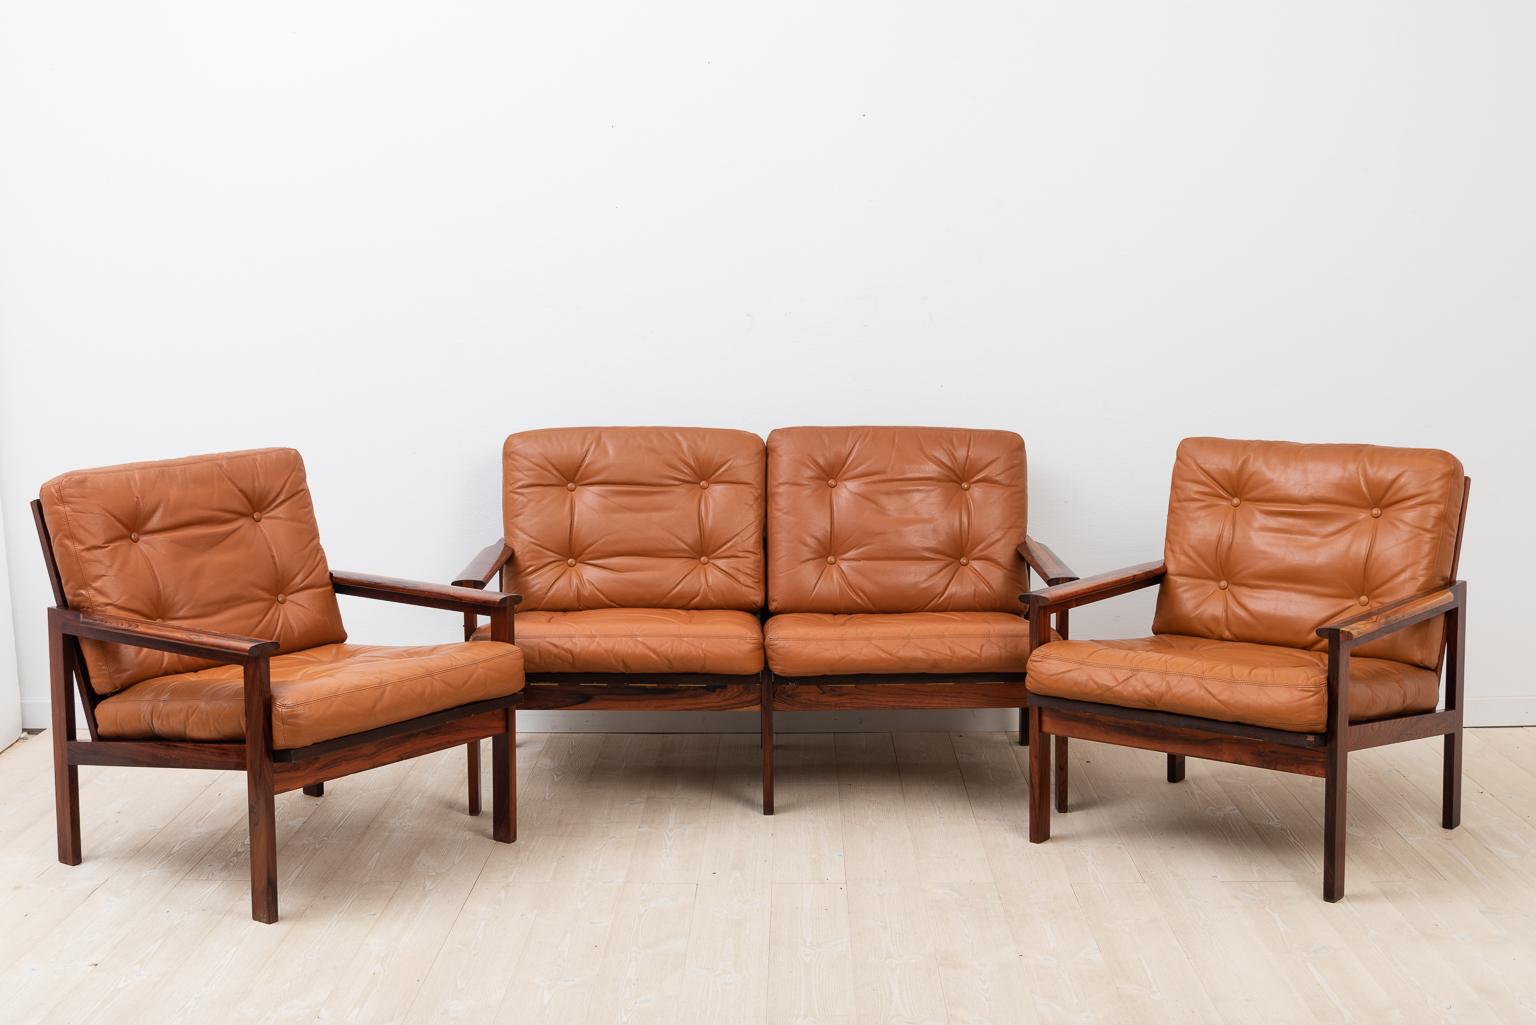 Capella sofa group designed by Illum Wikkelsø 1959. Produced in Denmark by Niels Eilersen. Solid rosewood frame with loose cushions in original leather. The rubber elastics in the seats are new. Cites certificate is available. The group is marked